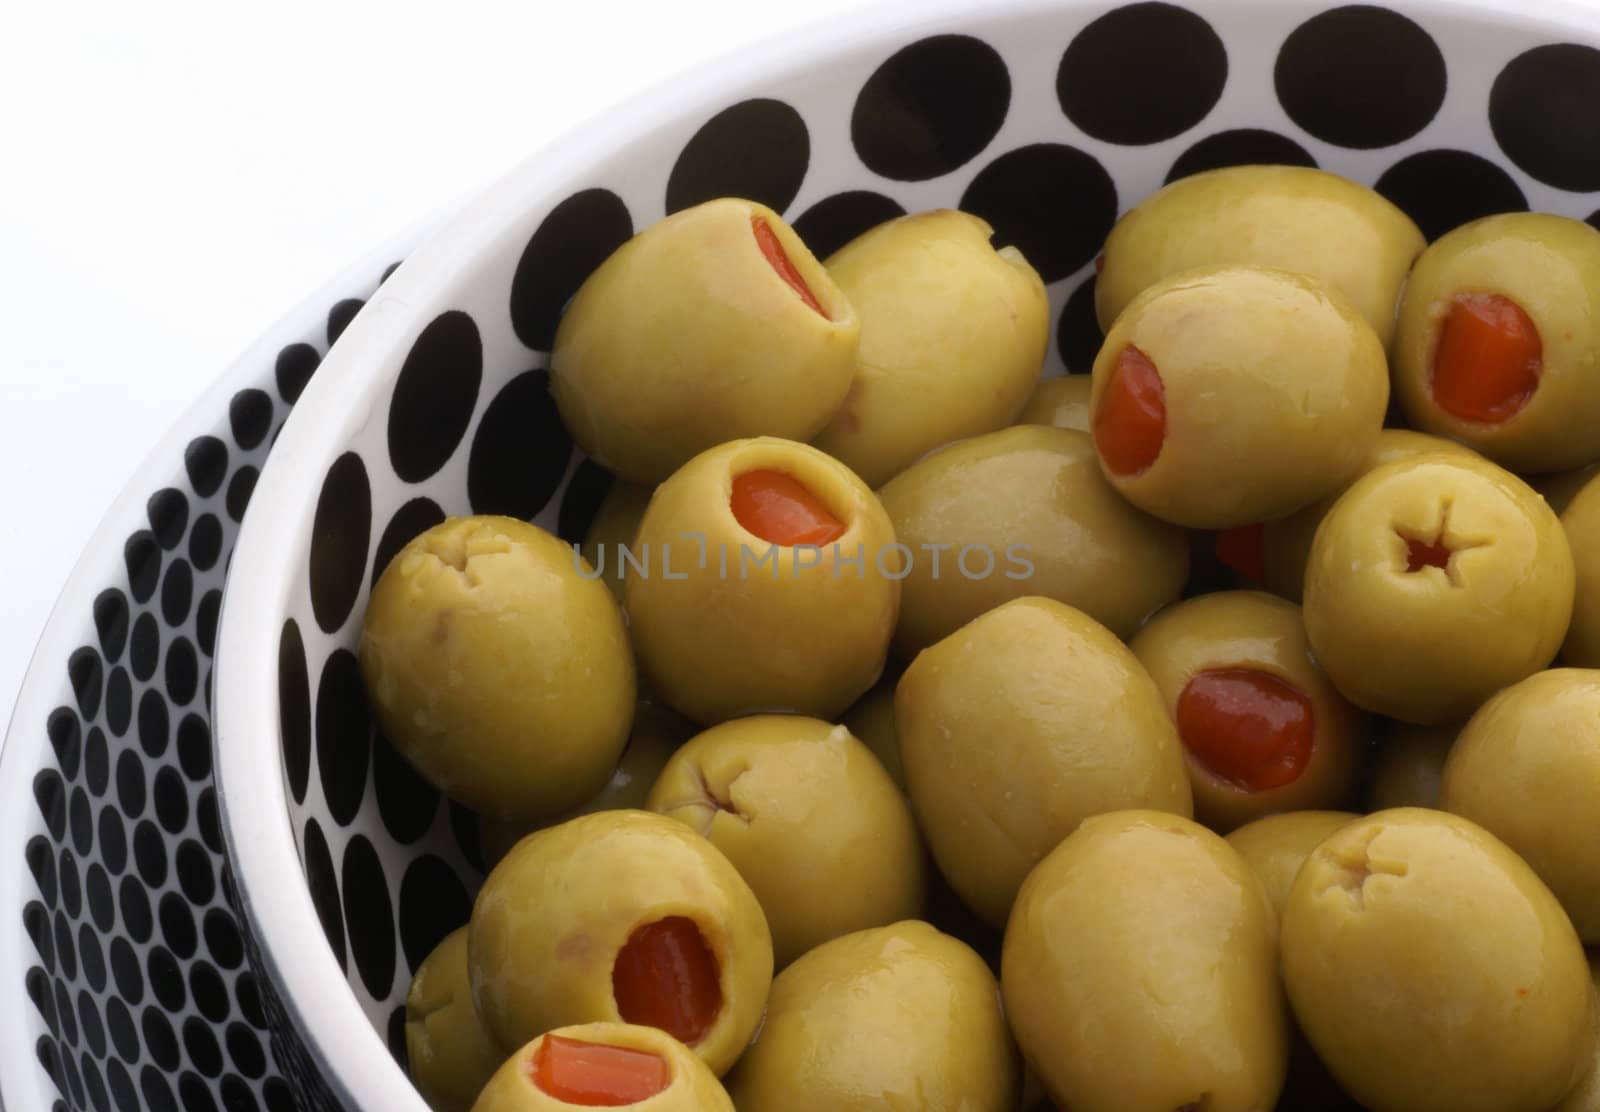 Greenstuffed olives in black and white bowls.